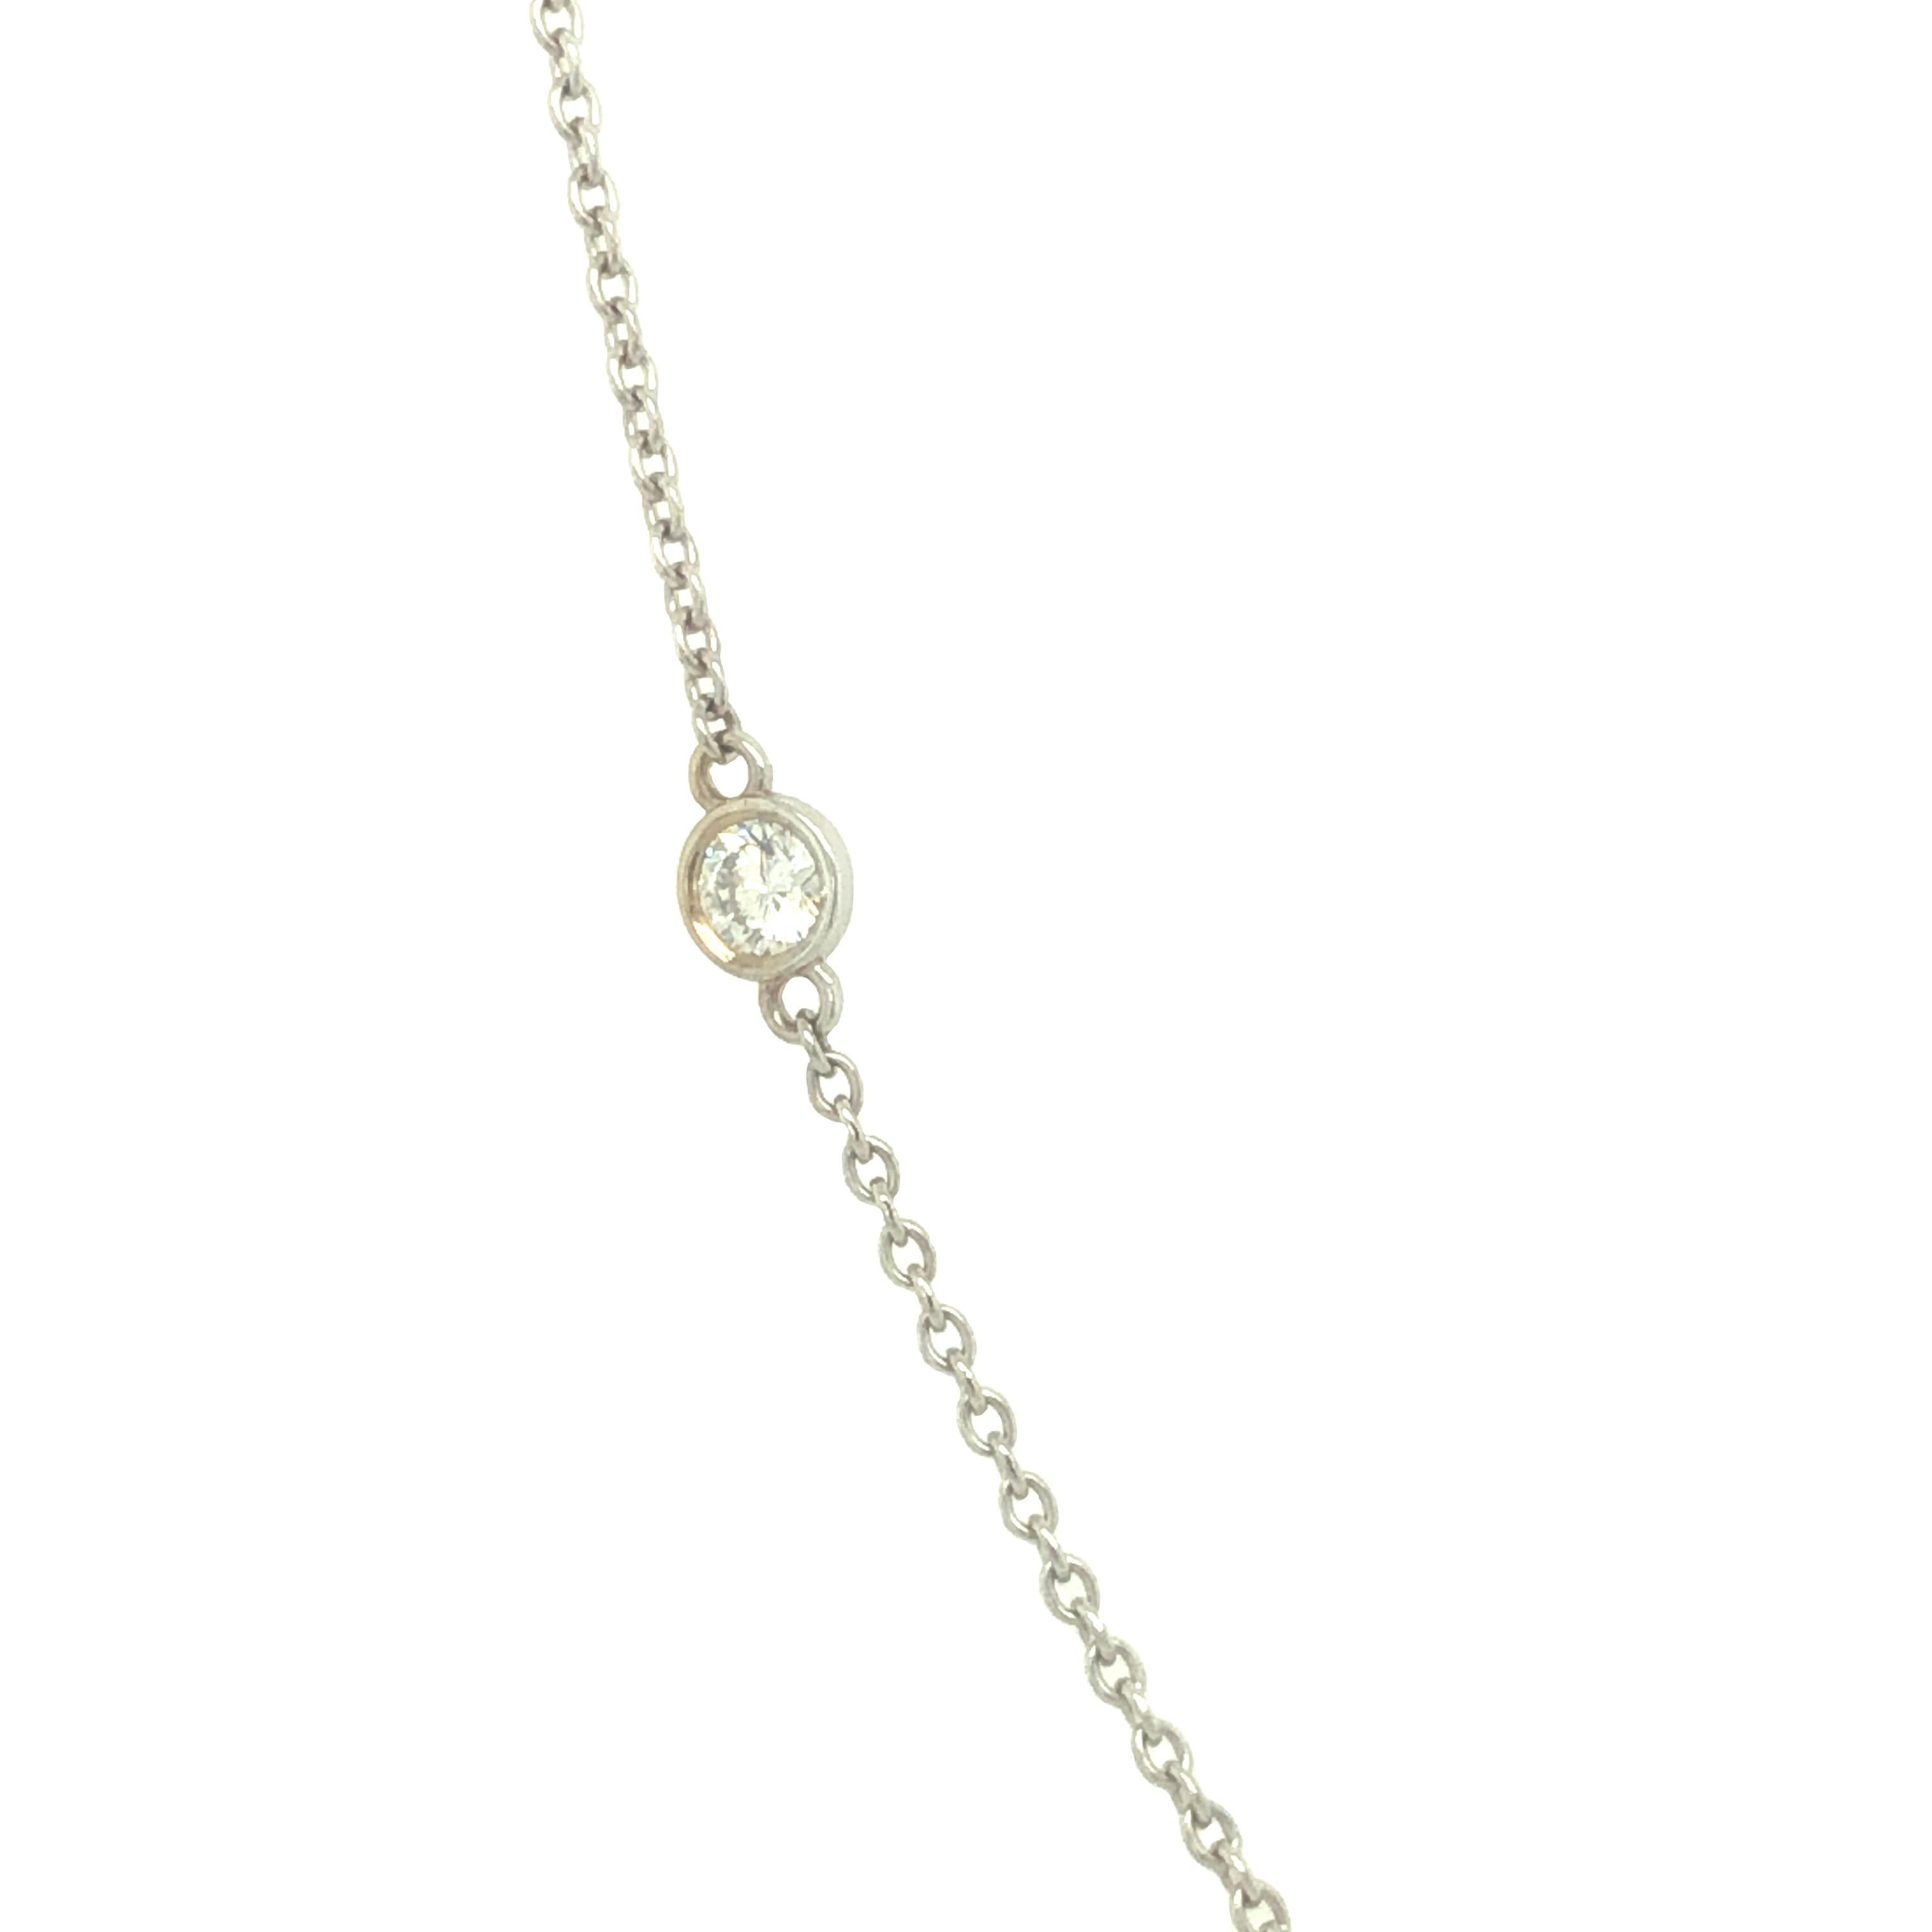 Round Cut Gems Are Forever Diamond by the Yard Necklace 18k White Gold For Sale